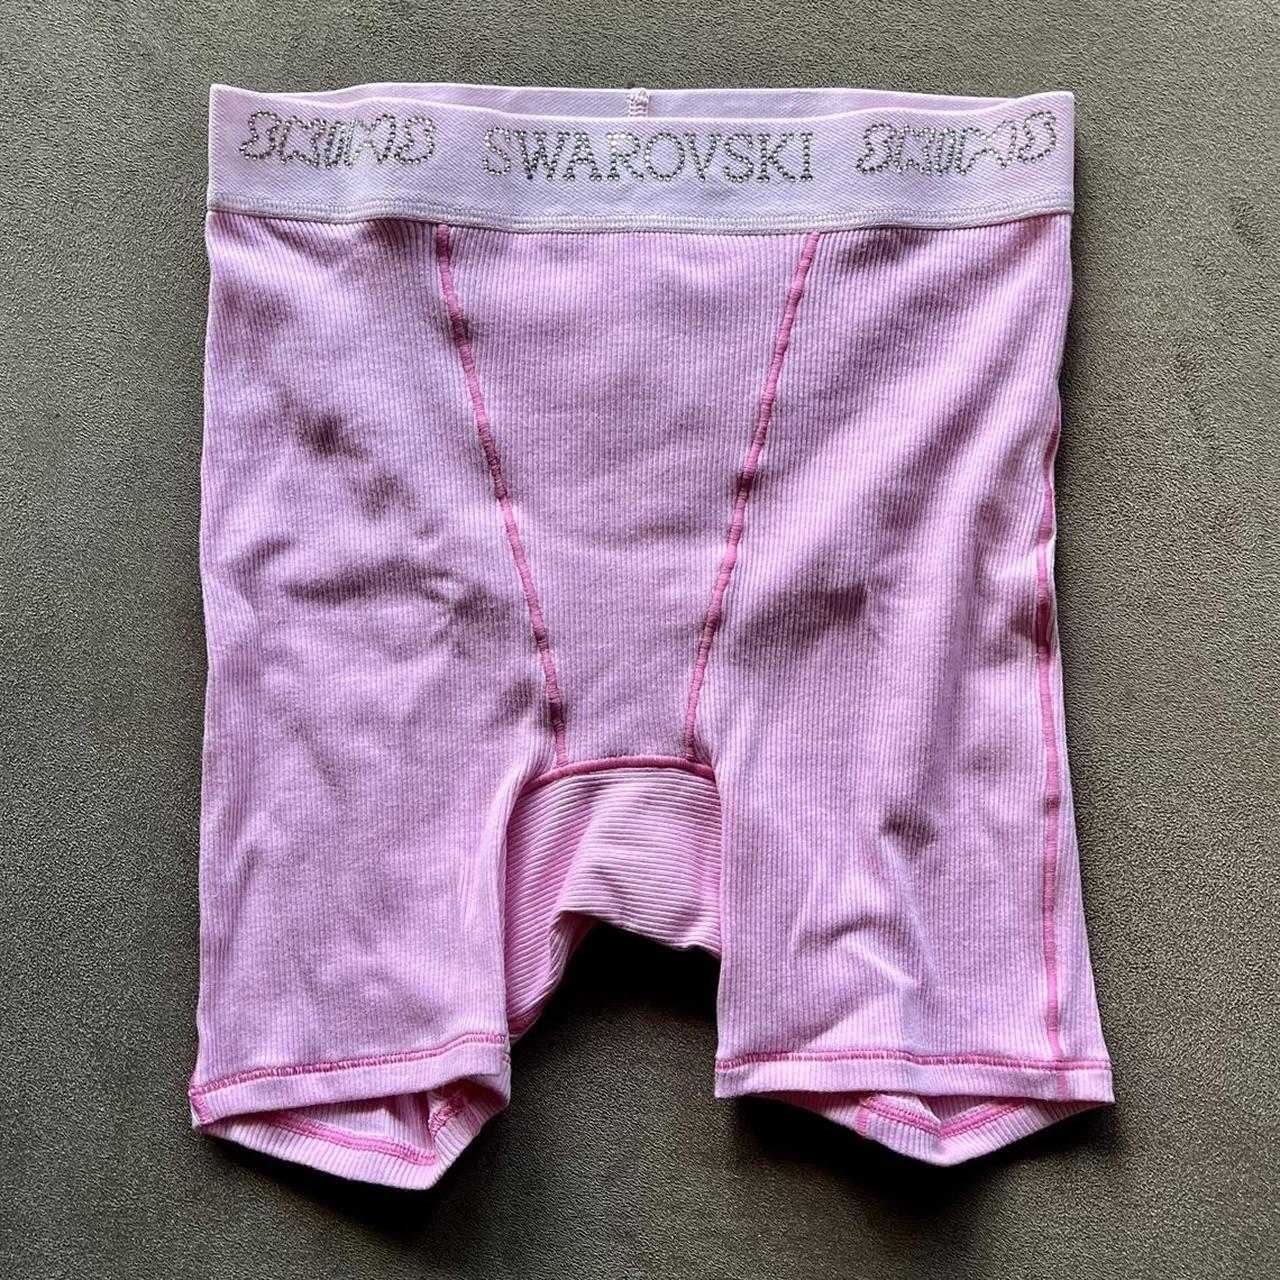 Skims Lace Short in Bubble Gum 💗Size Small 💗Brand - Depop